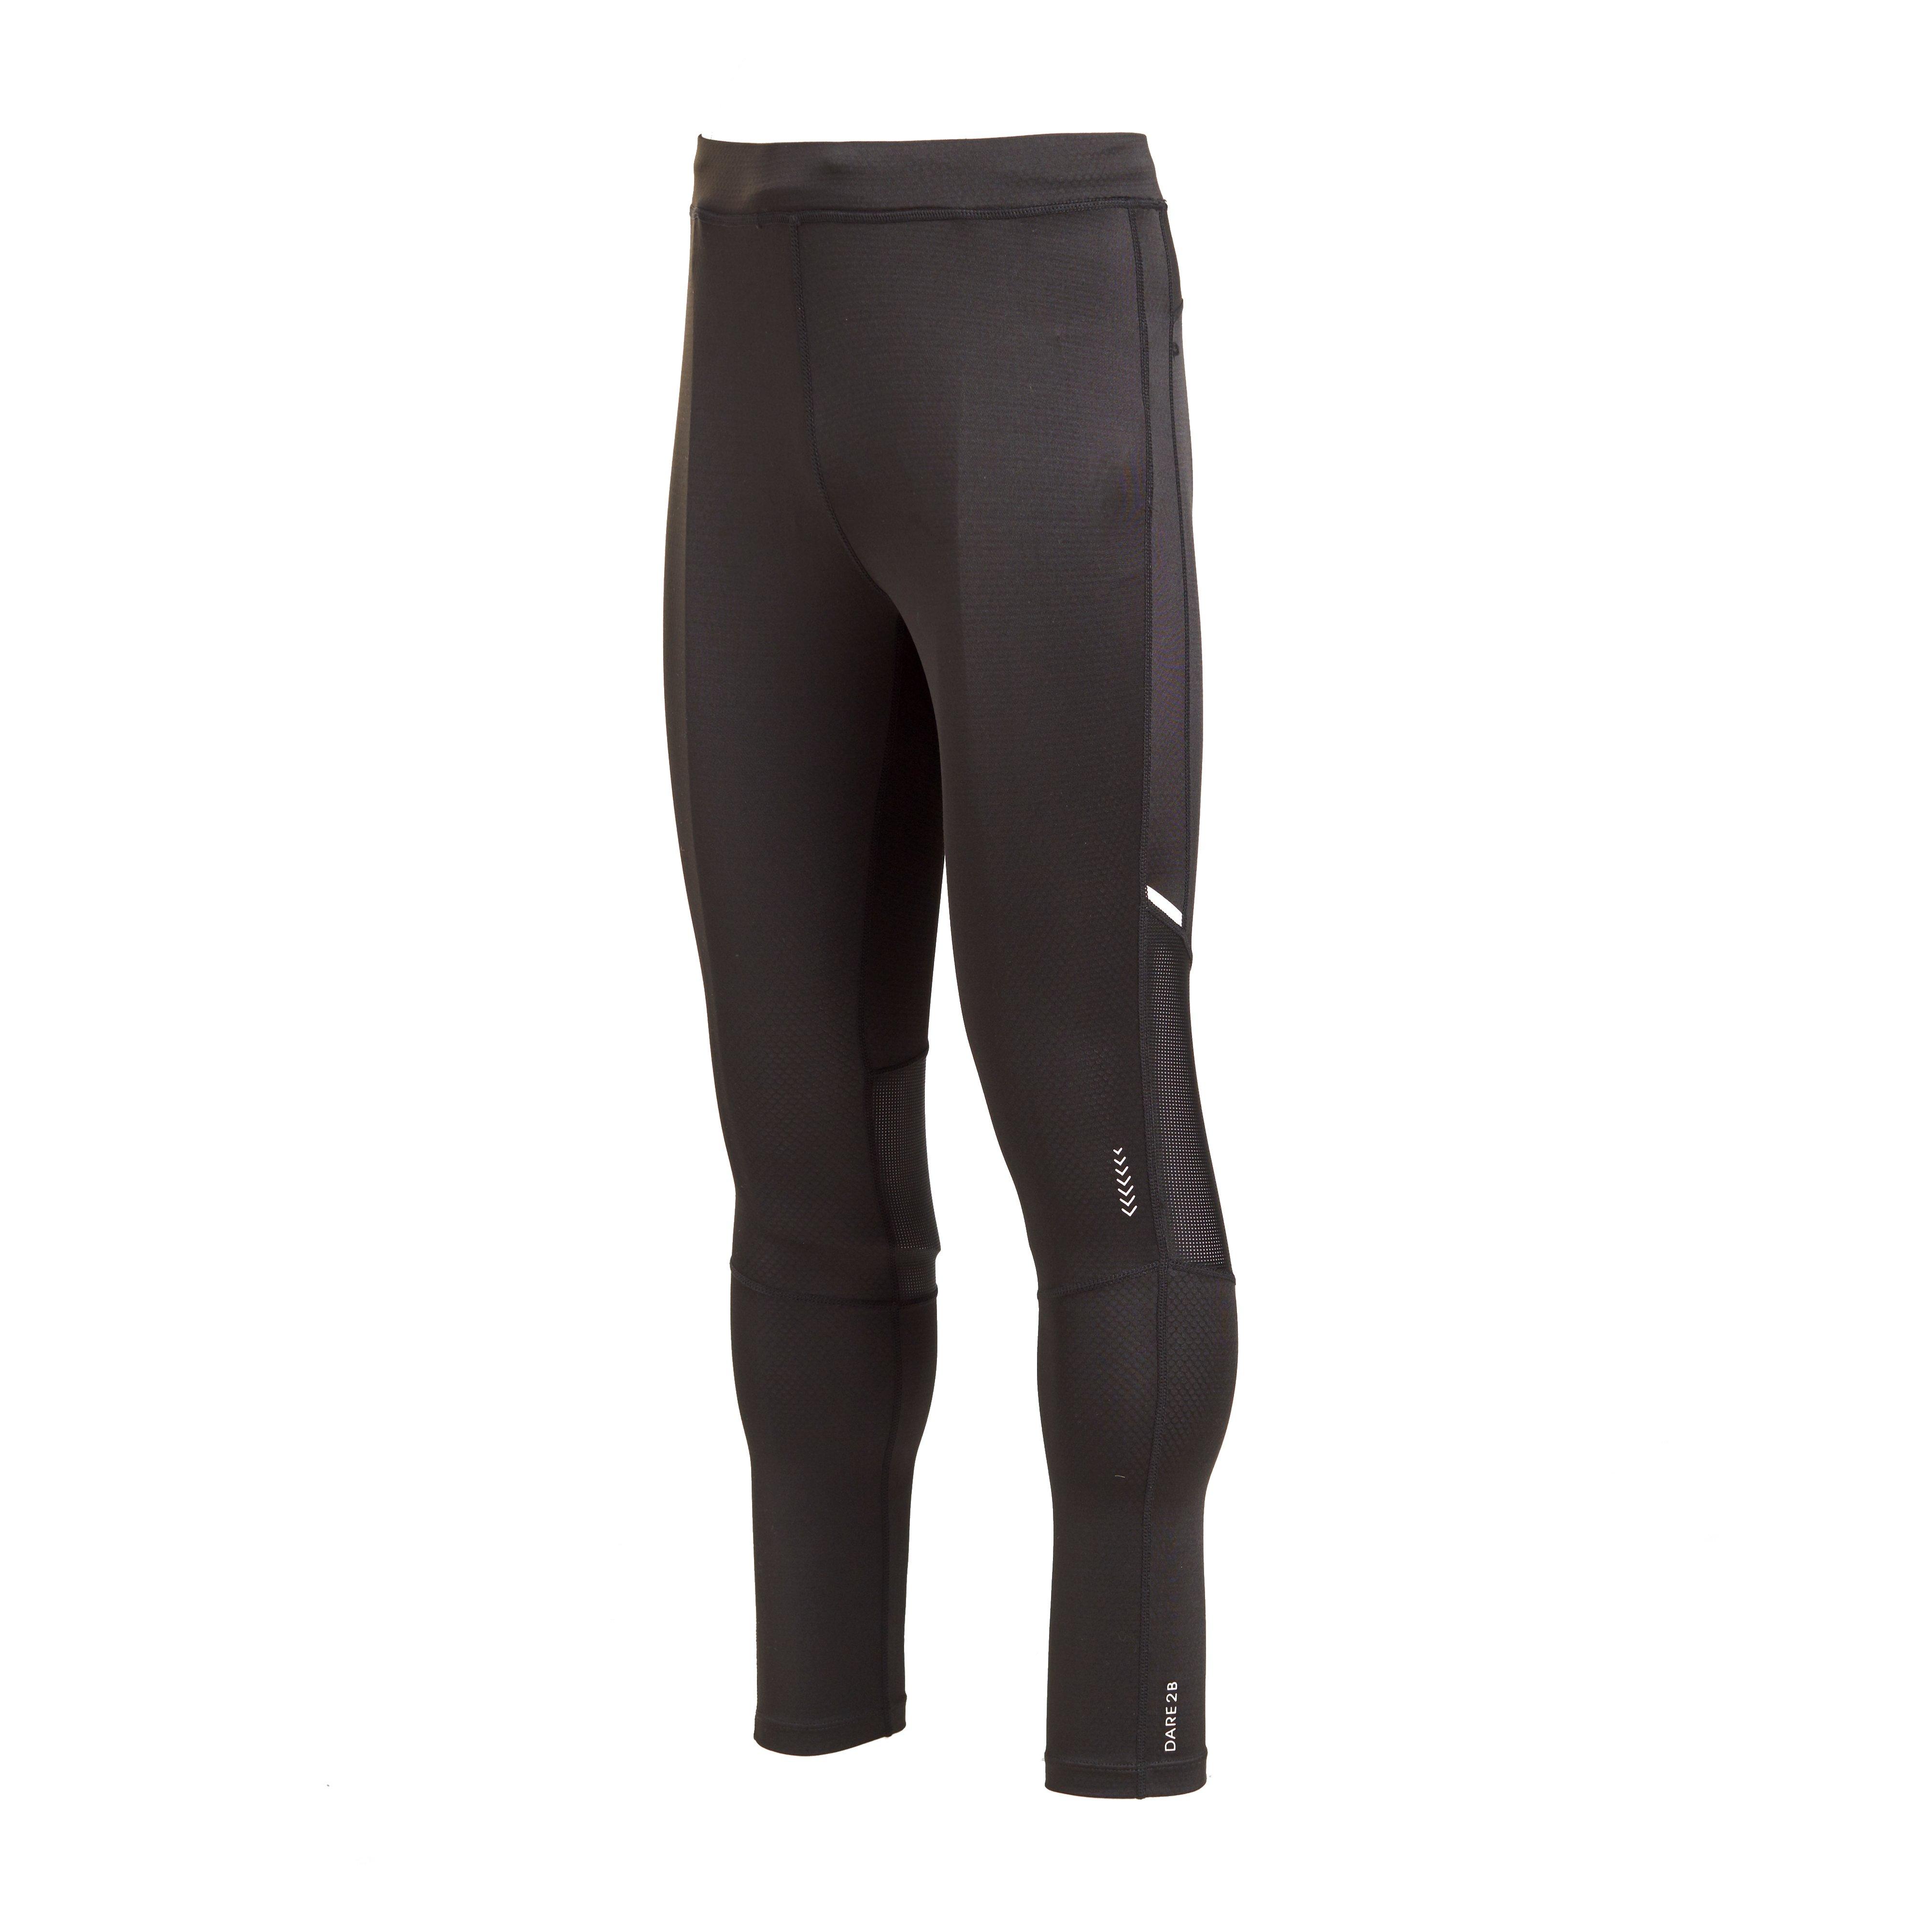 Dare 2B Men's Abaccus II Lightweight Fitness Tights Review